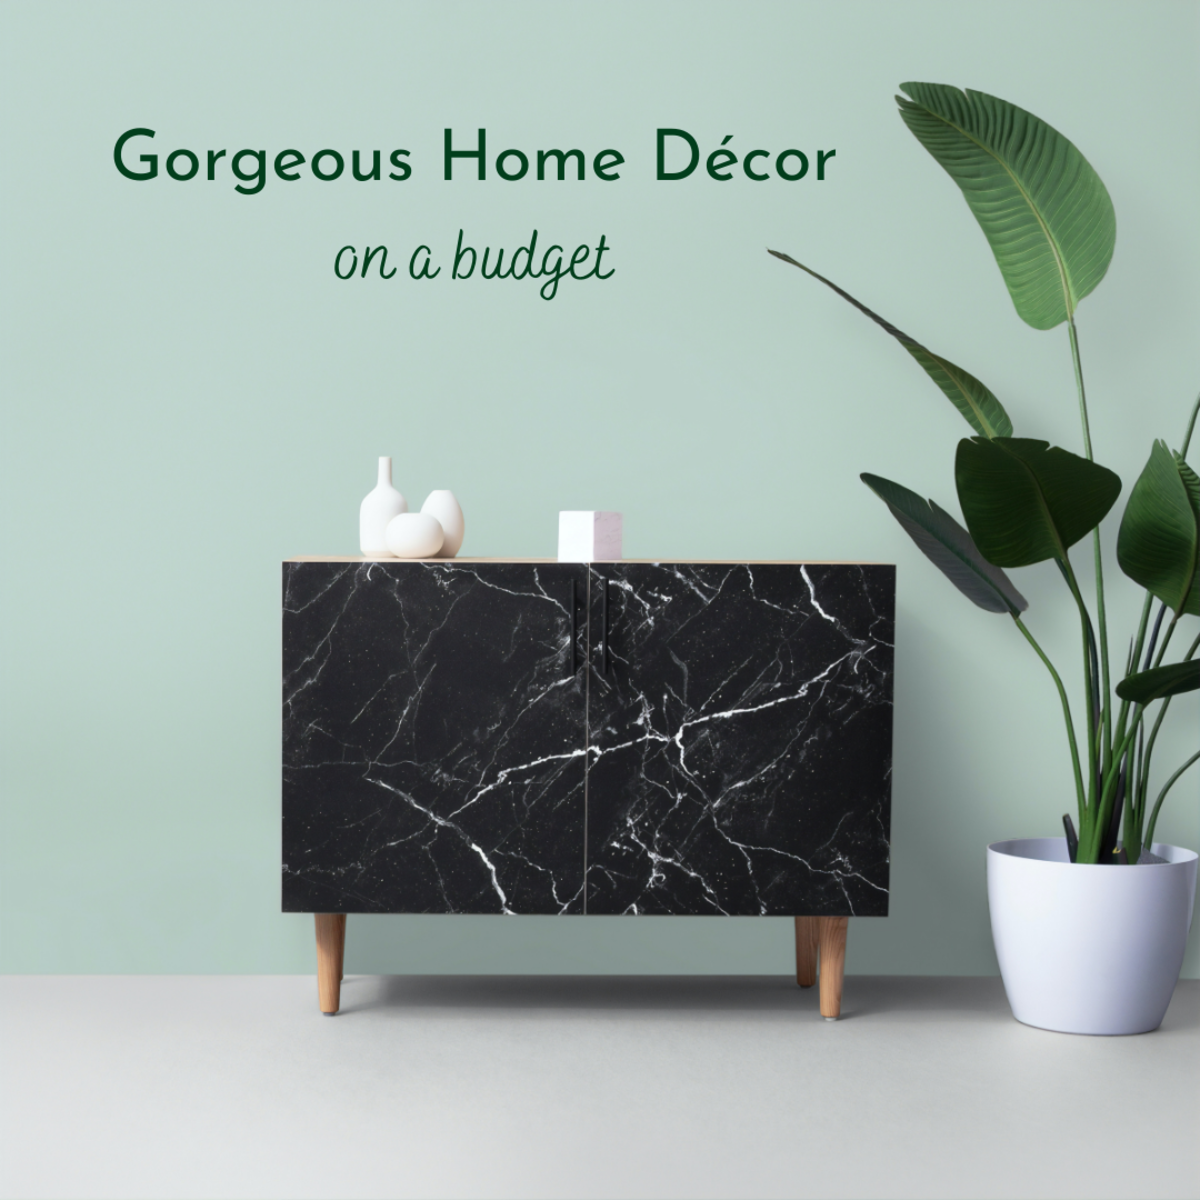 Even if you're on a budget, you can make your home look gorgeous!